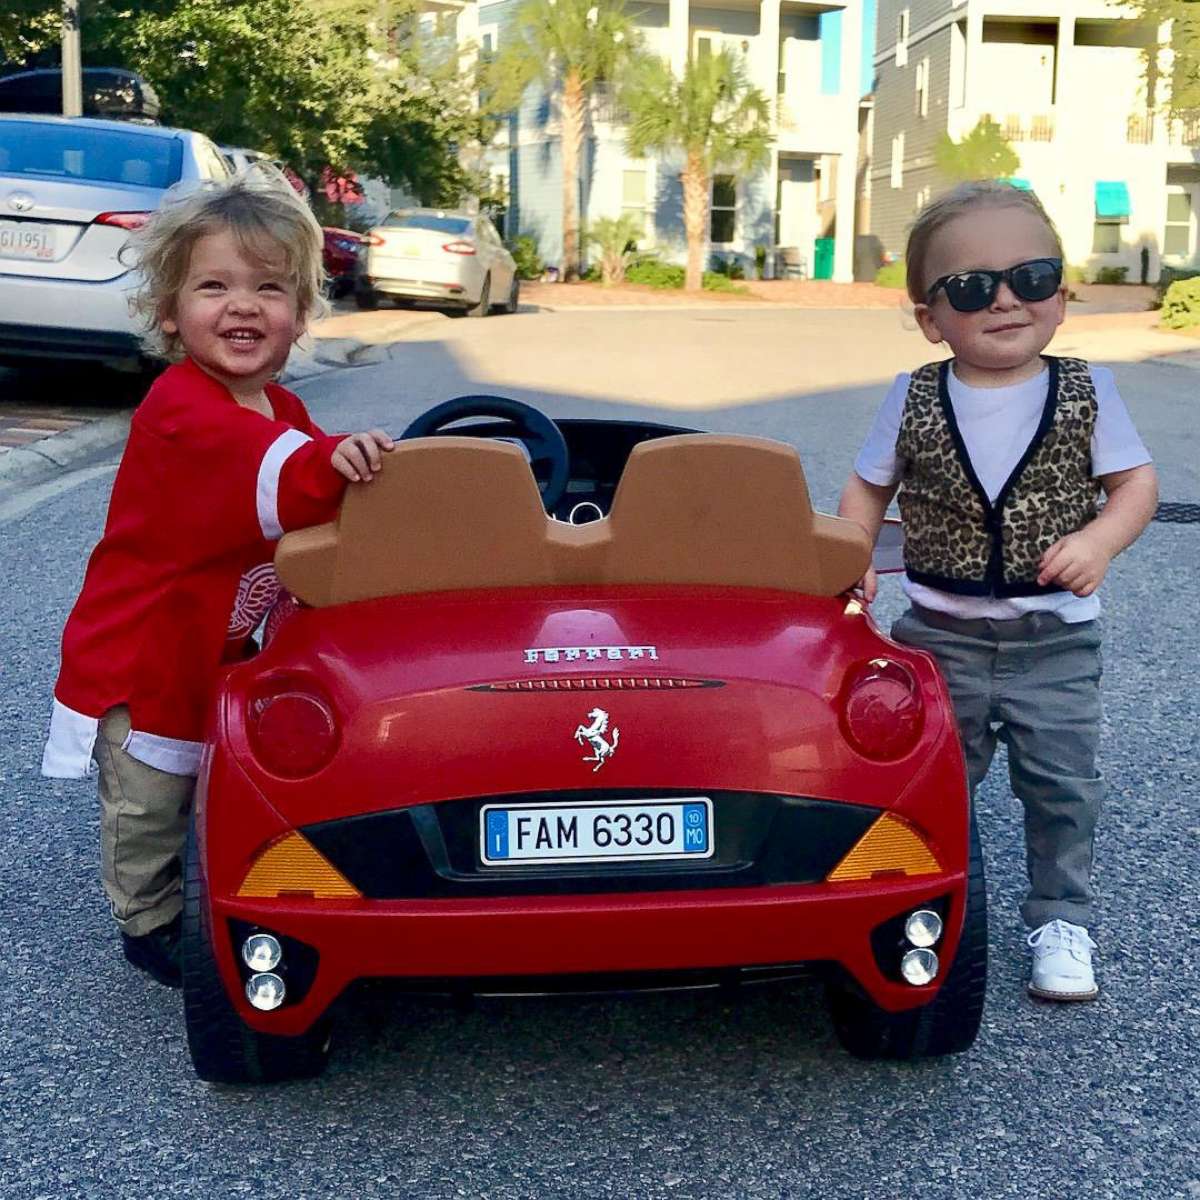 Twin toddlers nail 'Ferris Bueller's Day Off' Halloween costumes